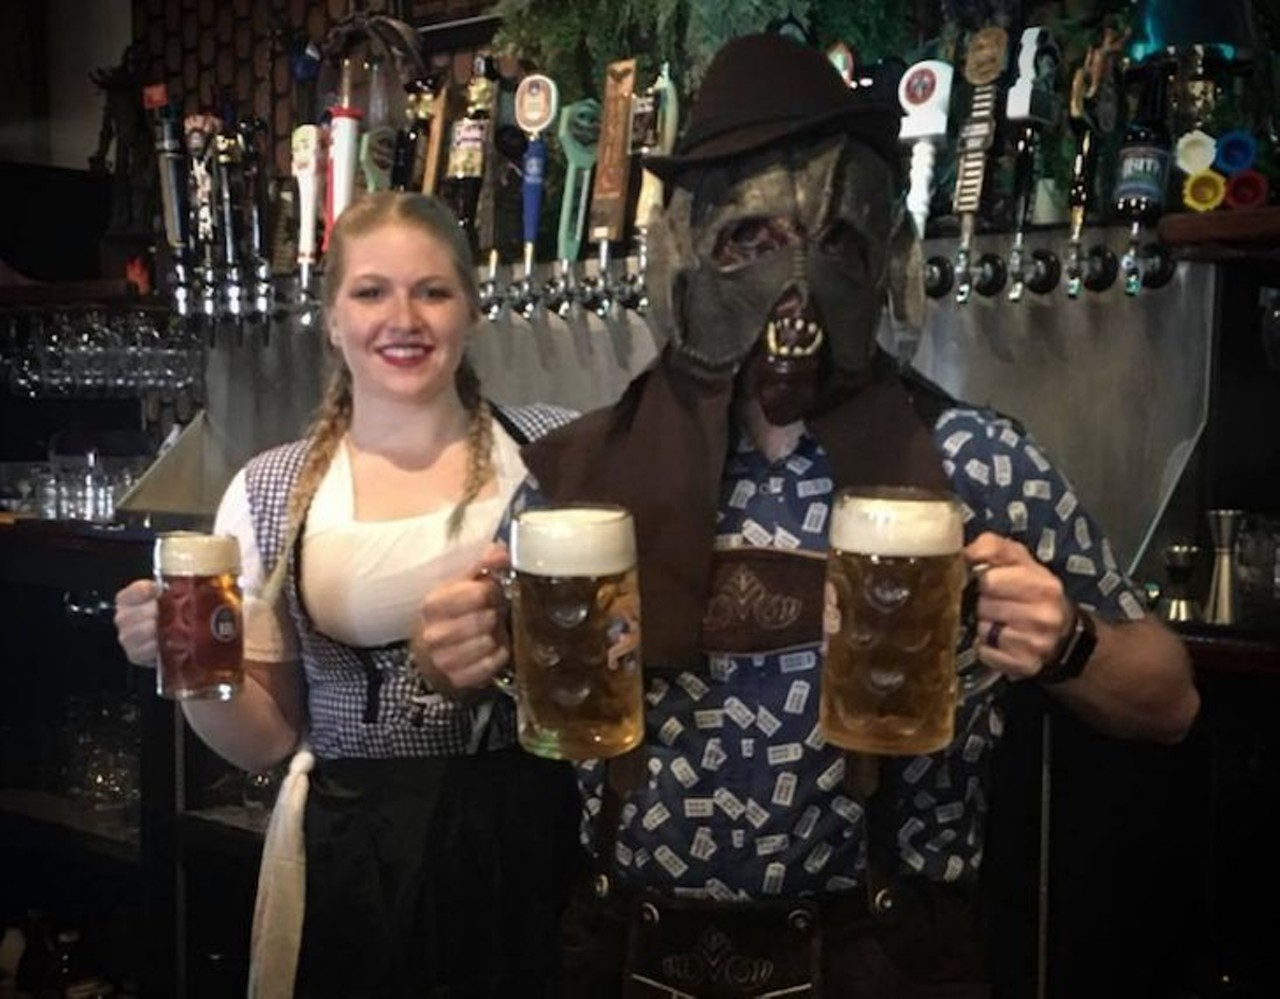 Saturday, Oct. 6 
Orctoberfest
Middle Earth-inspired Oktoberfest party with music, food, feats of strength and more.
1 pm; Cloak and Blaster, 875 Woodbury Road; free  facebook.com/events/273619290134851/
Photo via The Cloak & Blaster/Facebook